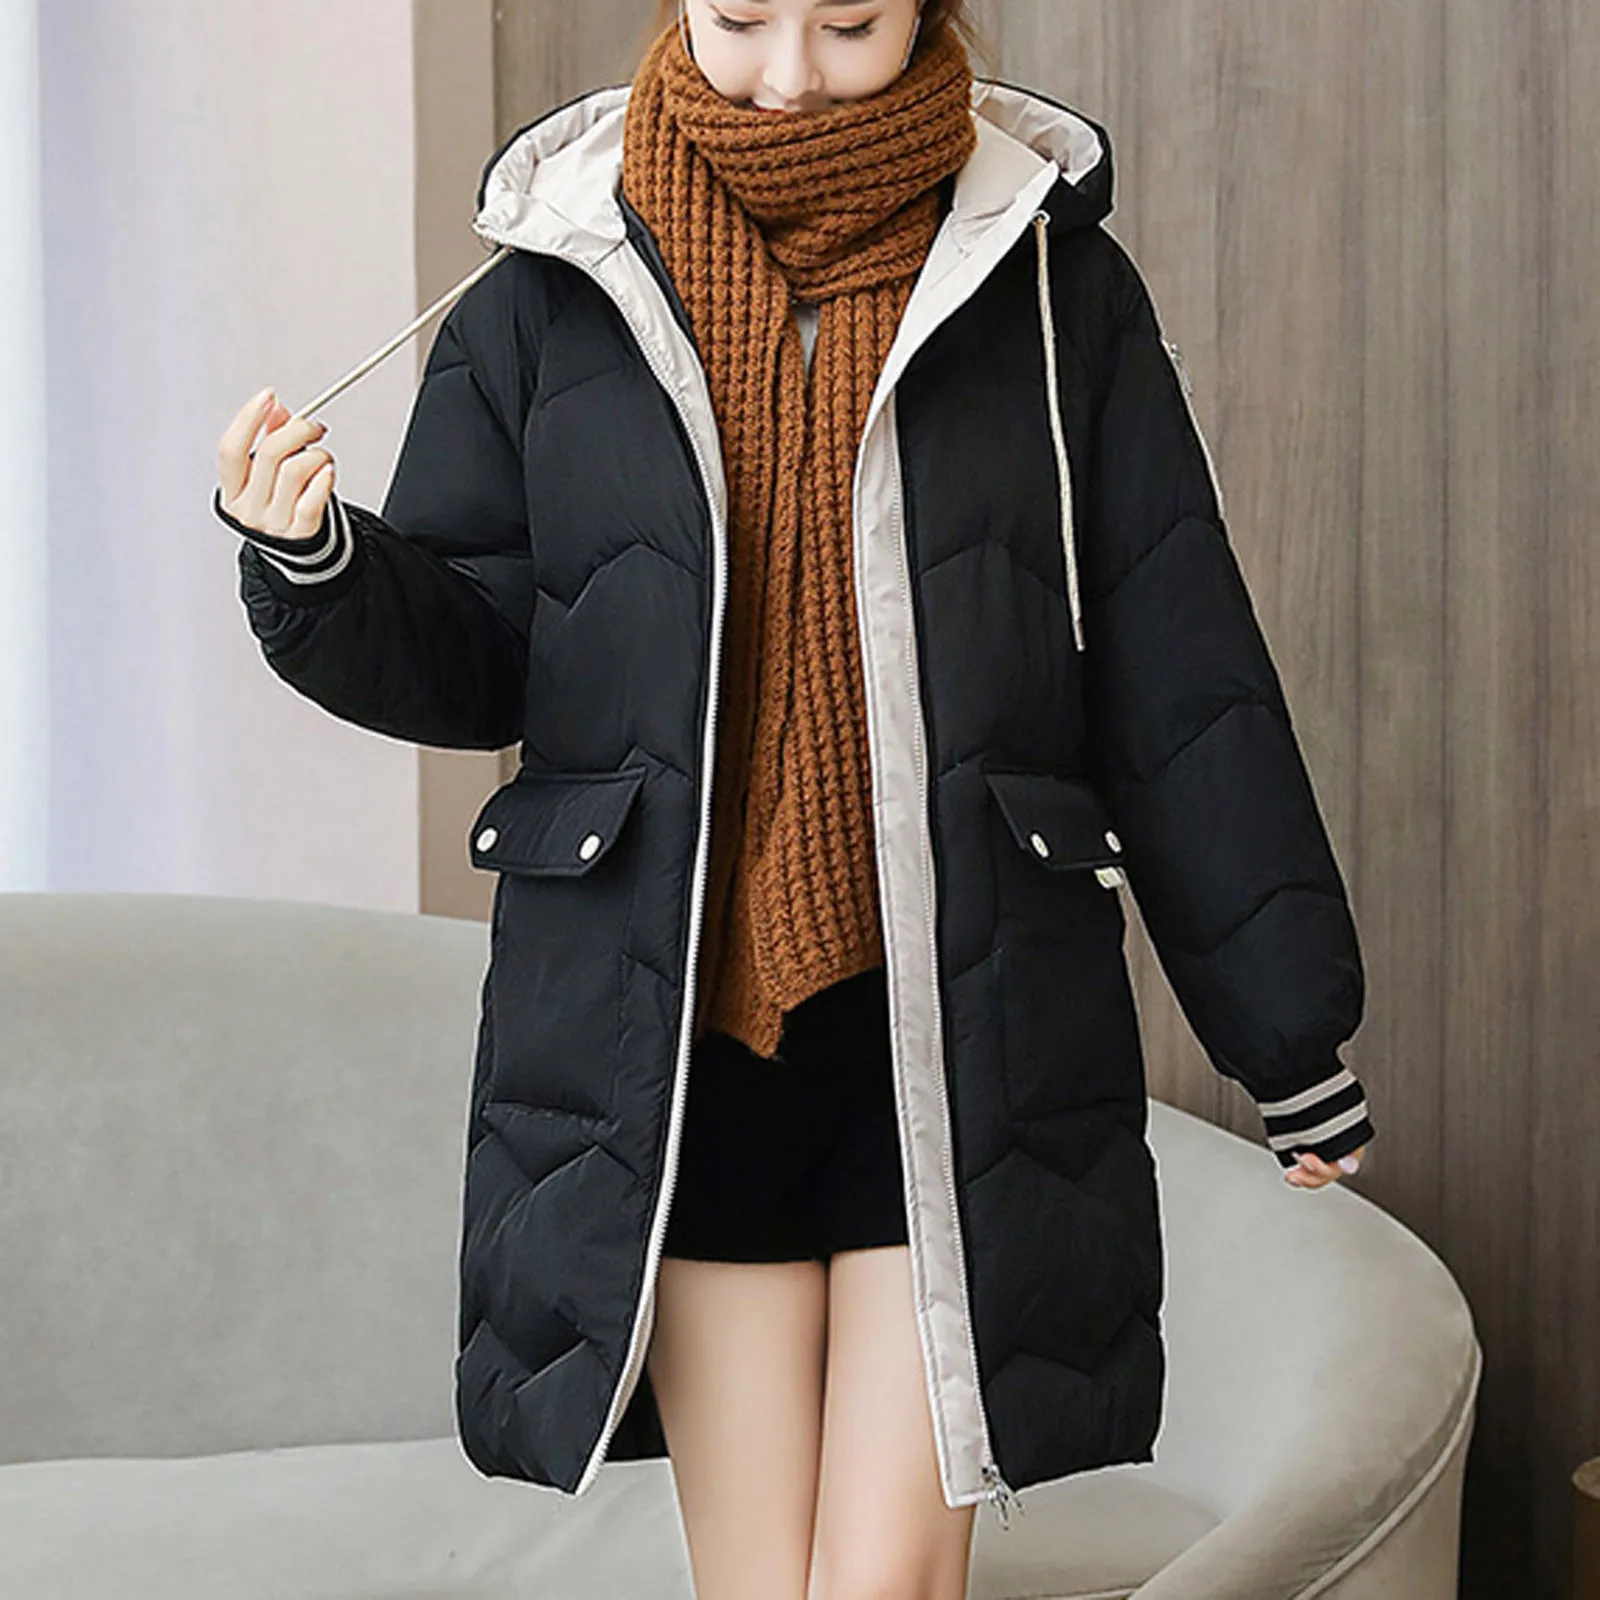 

Fashion Womens Winter Parkas Long Sleeve Solid Colors Snow Jacket Warm Overcoat Hooded Zipper Thicker Coat Pocket Outwear#g3